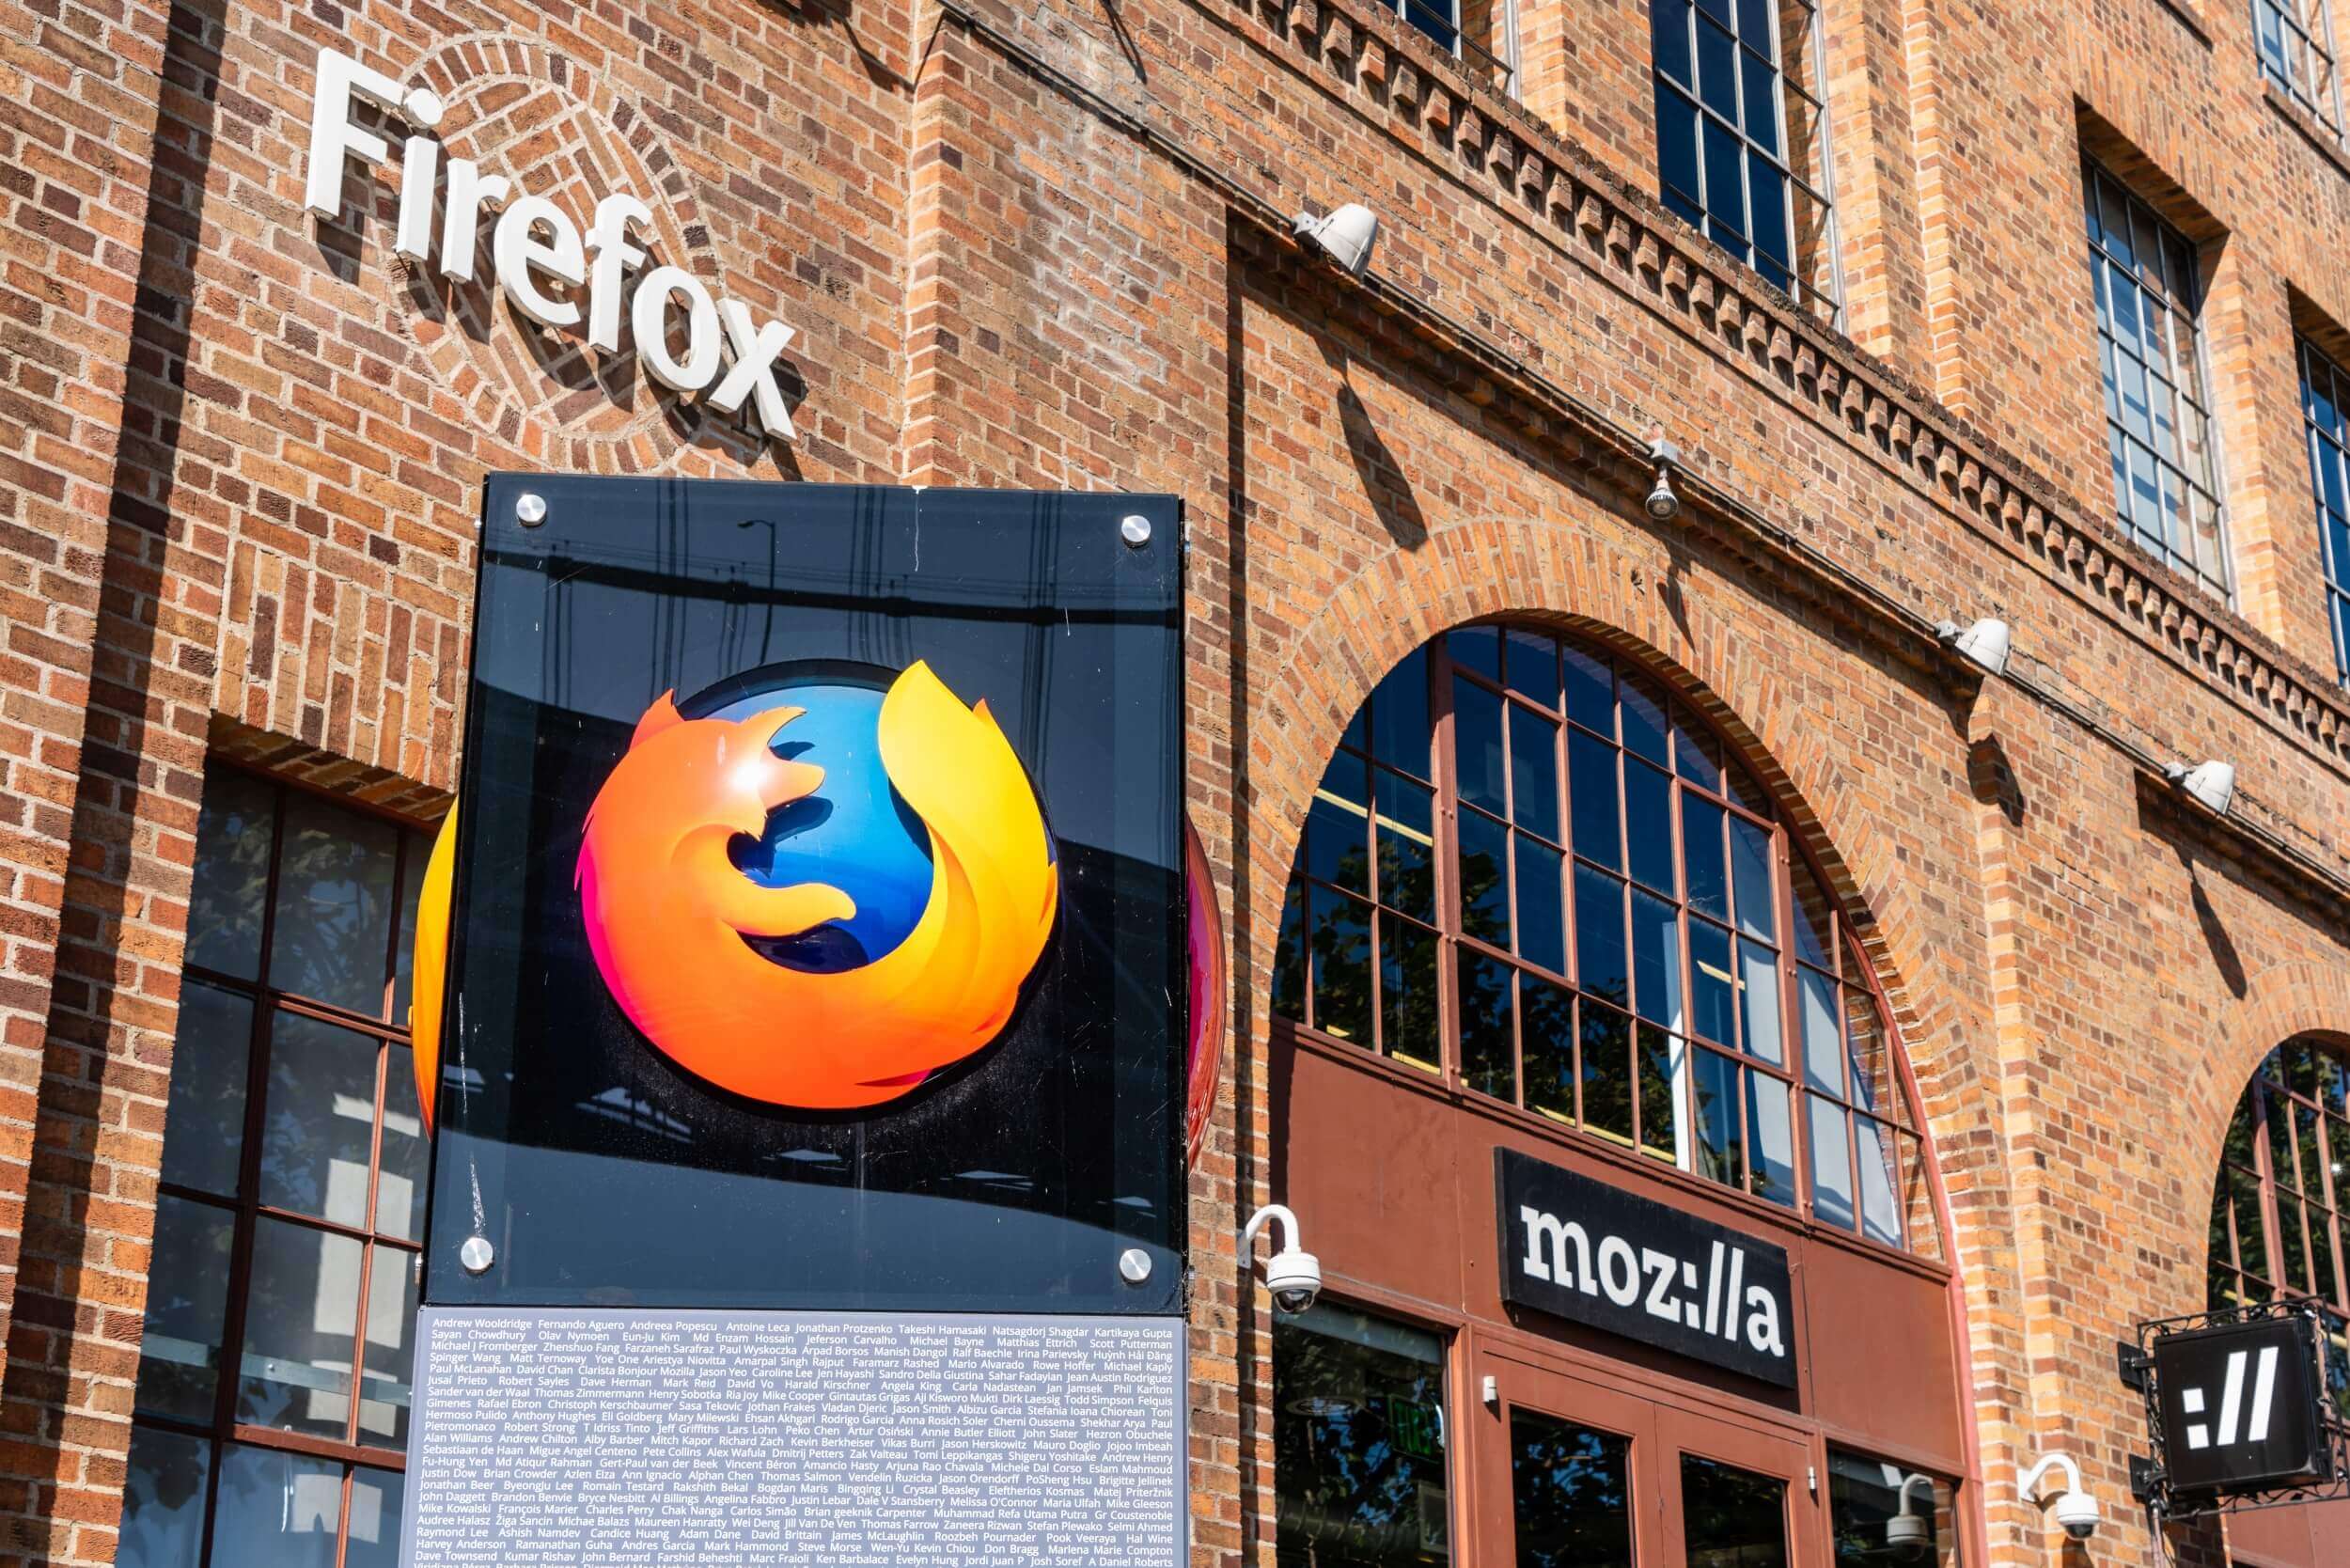 Mozilla is laying off around 250 employees as part of major restructuring